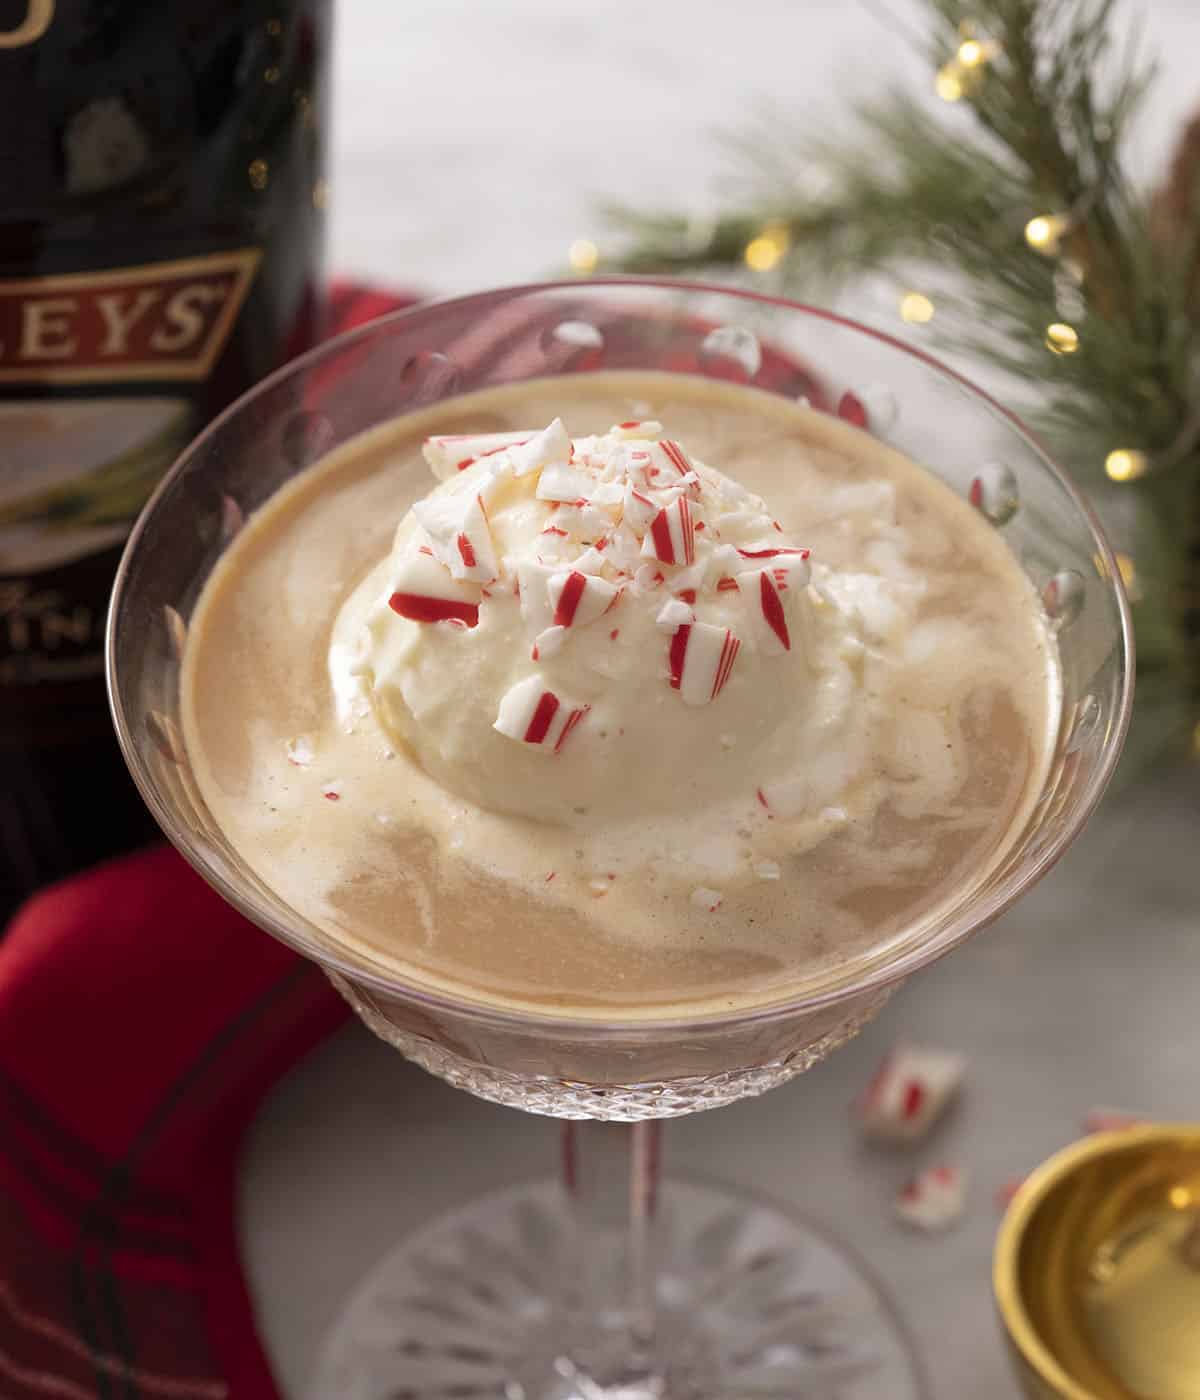 A baileys affogato in a crystal glass next to a bottle of Baileys.